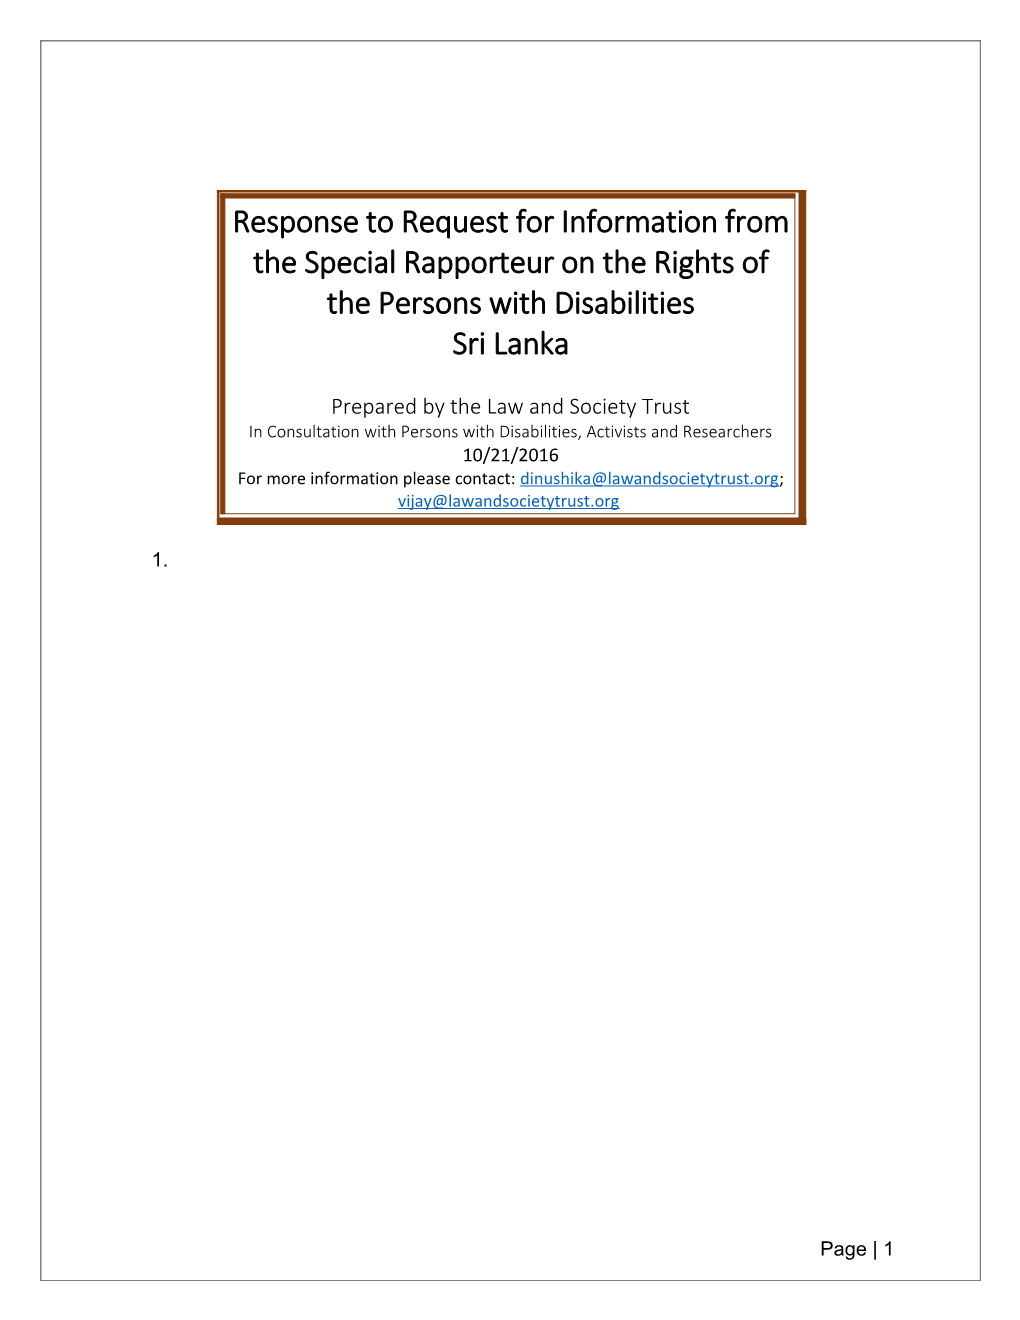 Response to Request for Information from the Special Rapporteur on the Rights of the Persons